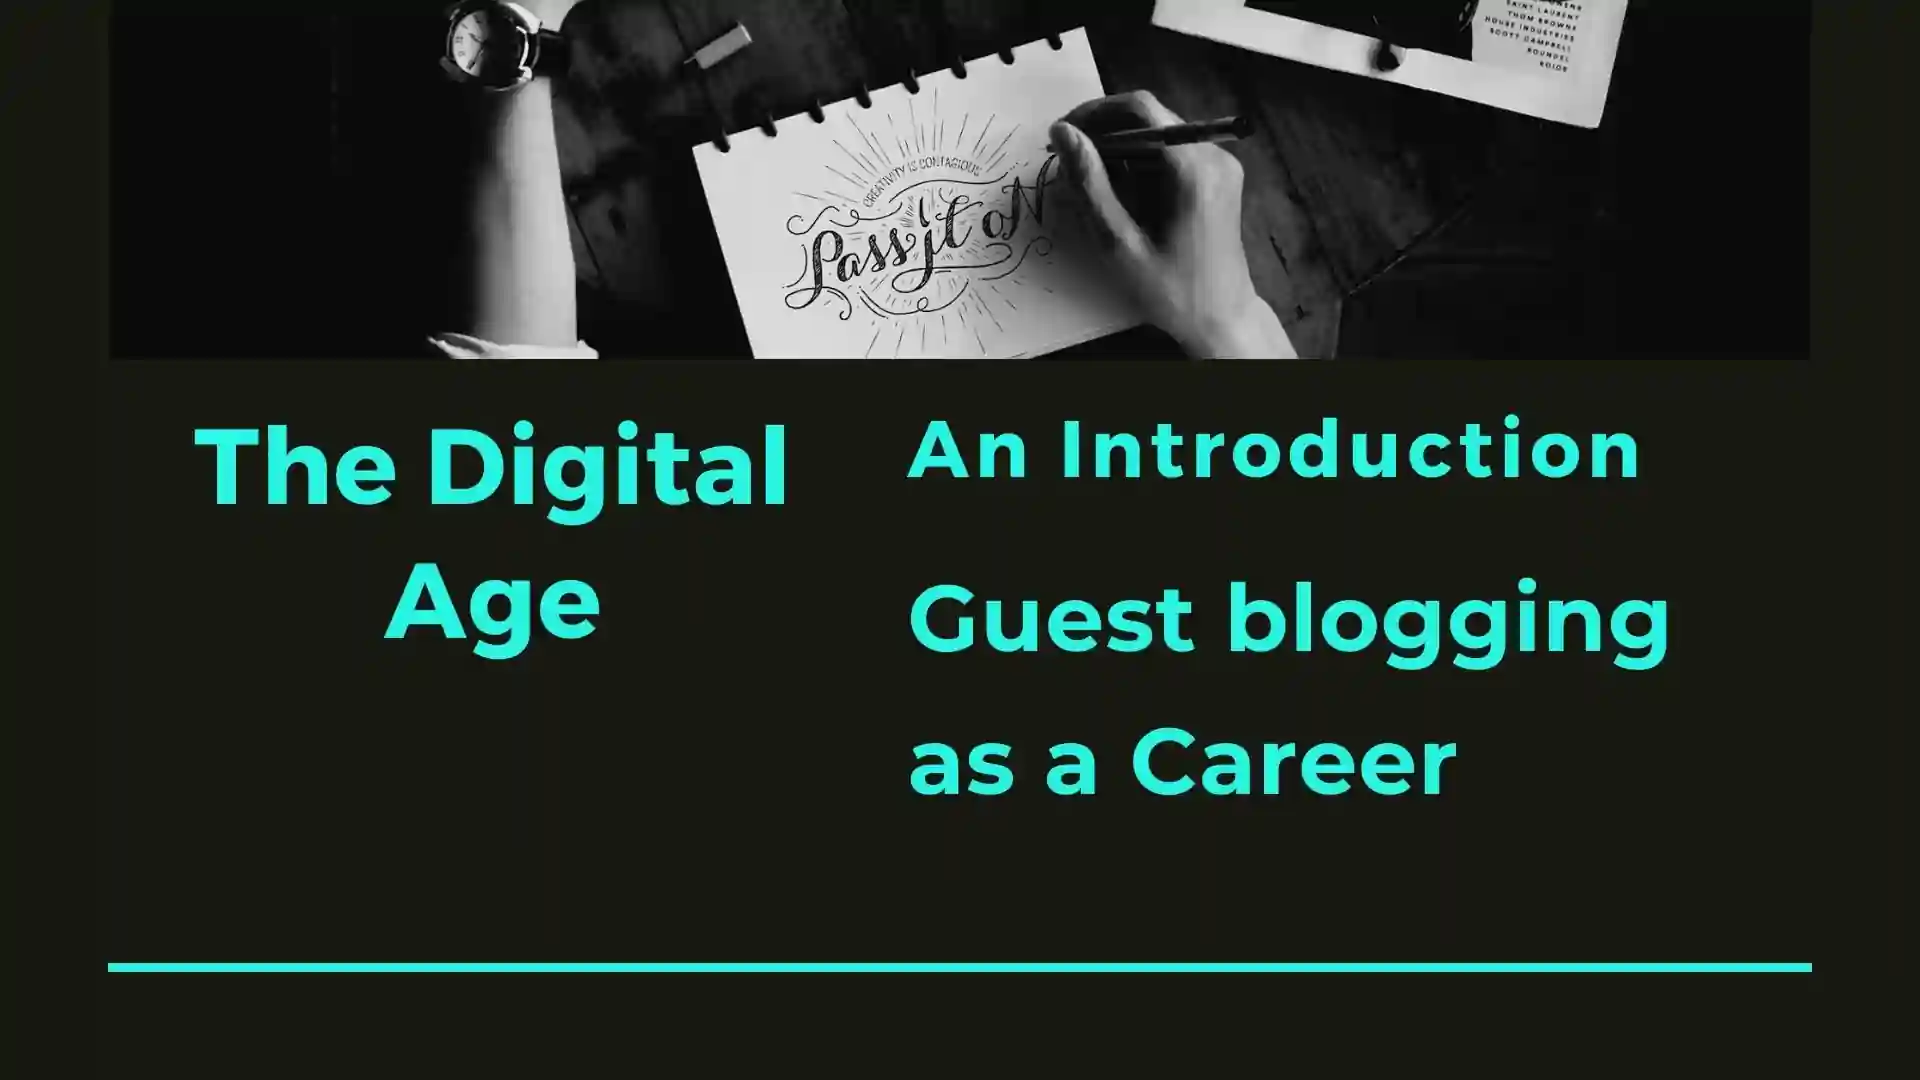 28 - How are guest blogging services beneficial for your blogging career?